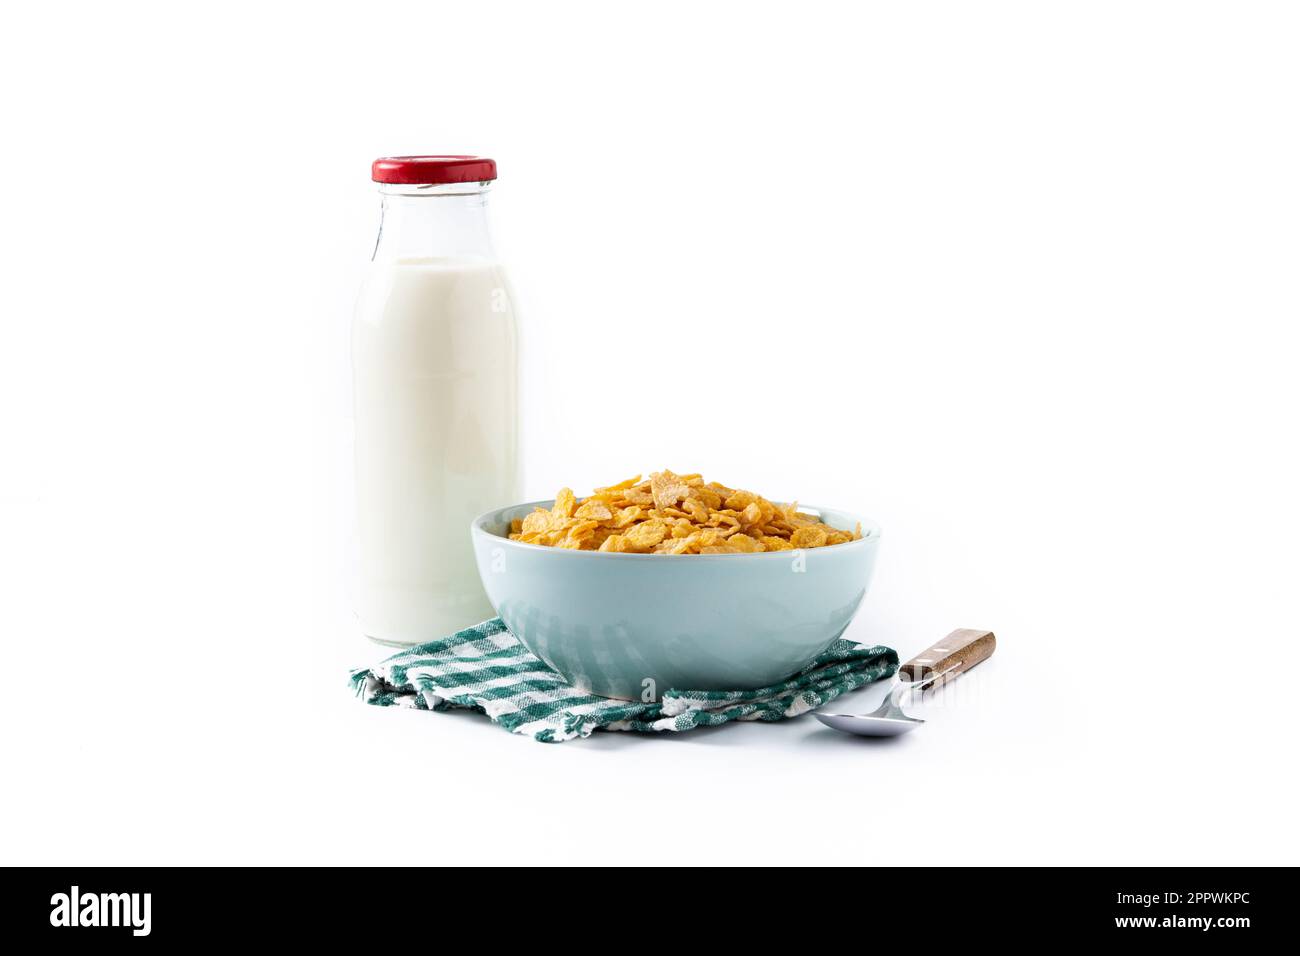 https://c8.alamy.com/comp/2PPWKPC/bowl-with-cereals-and-milk-bottle-for-breakfast-2PPWKPC.jpg